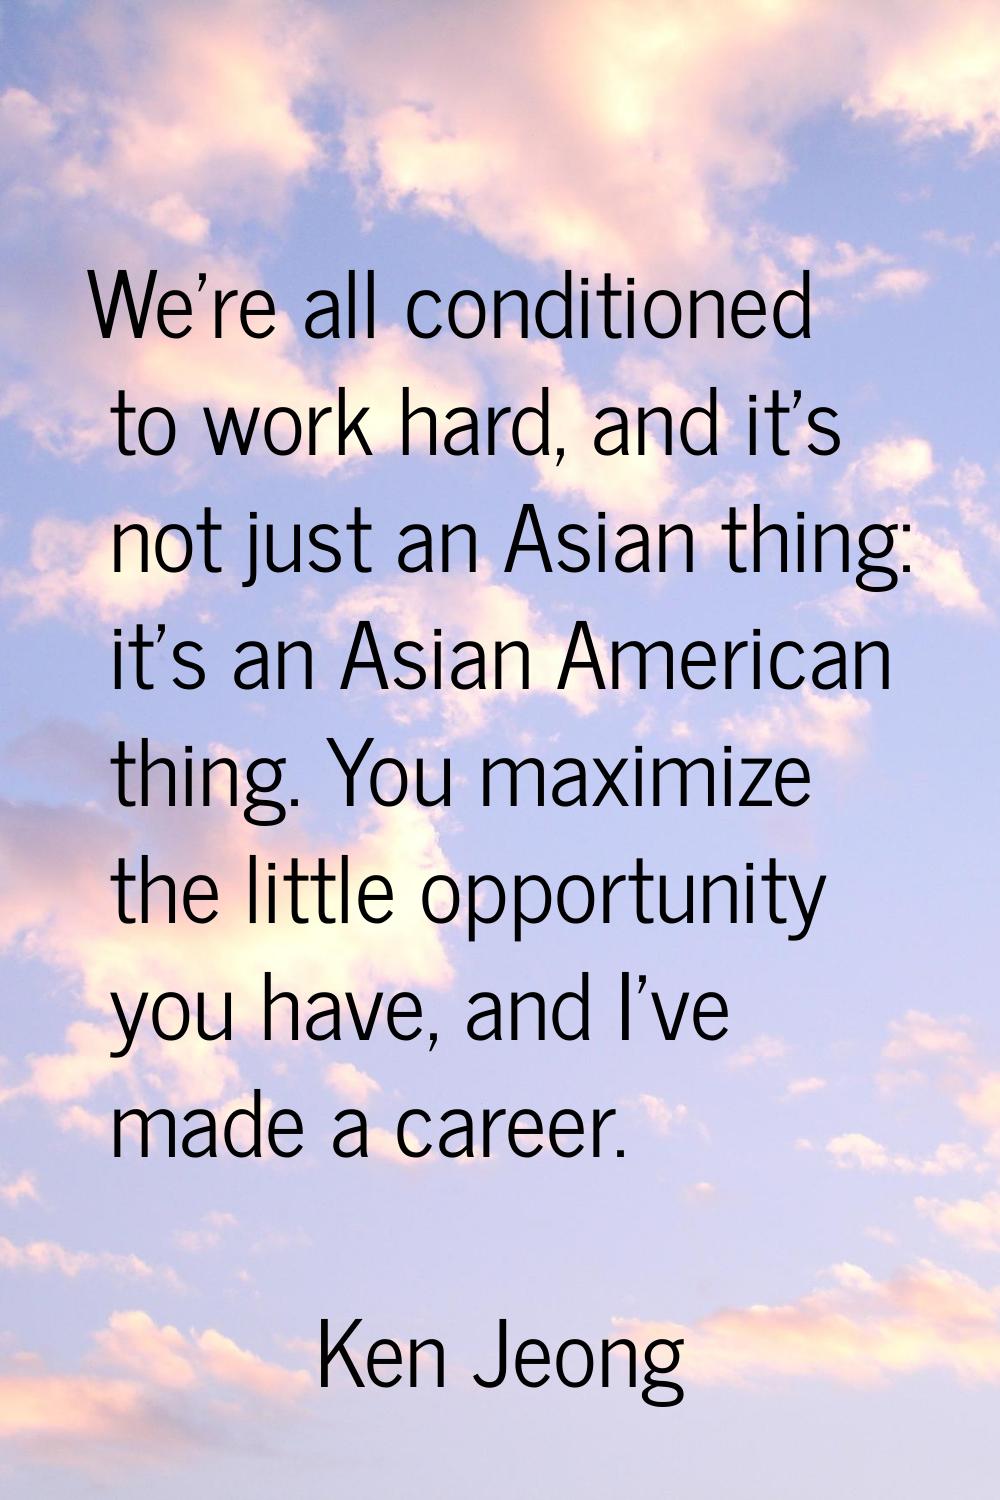 We're all conditioned to work hard, and it's not just an Asian thing: it's an Asian American thing.